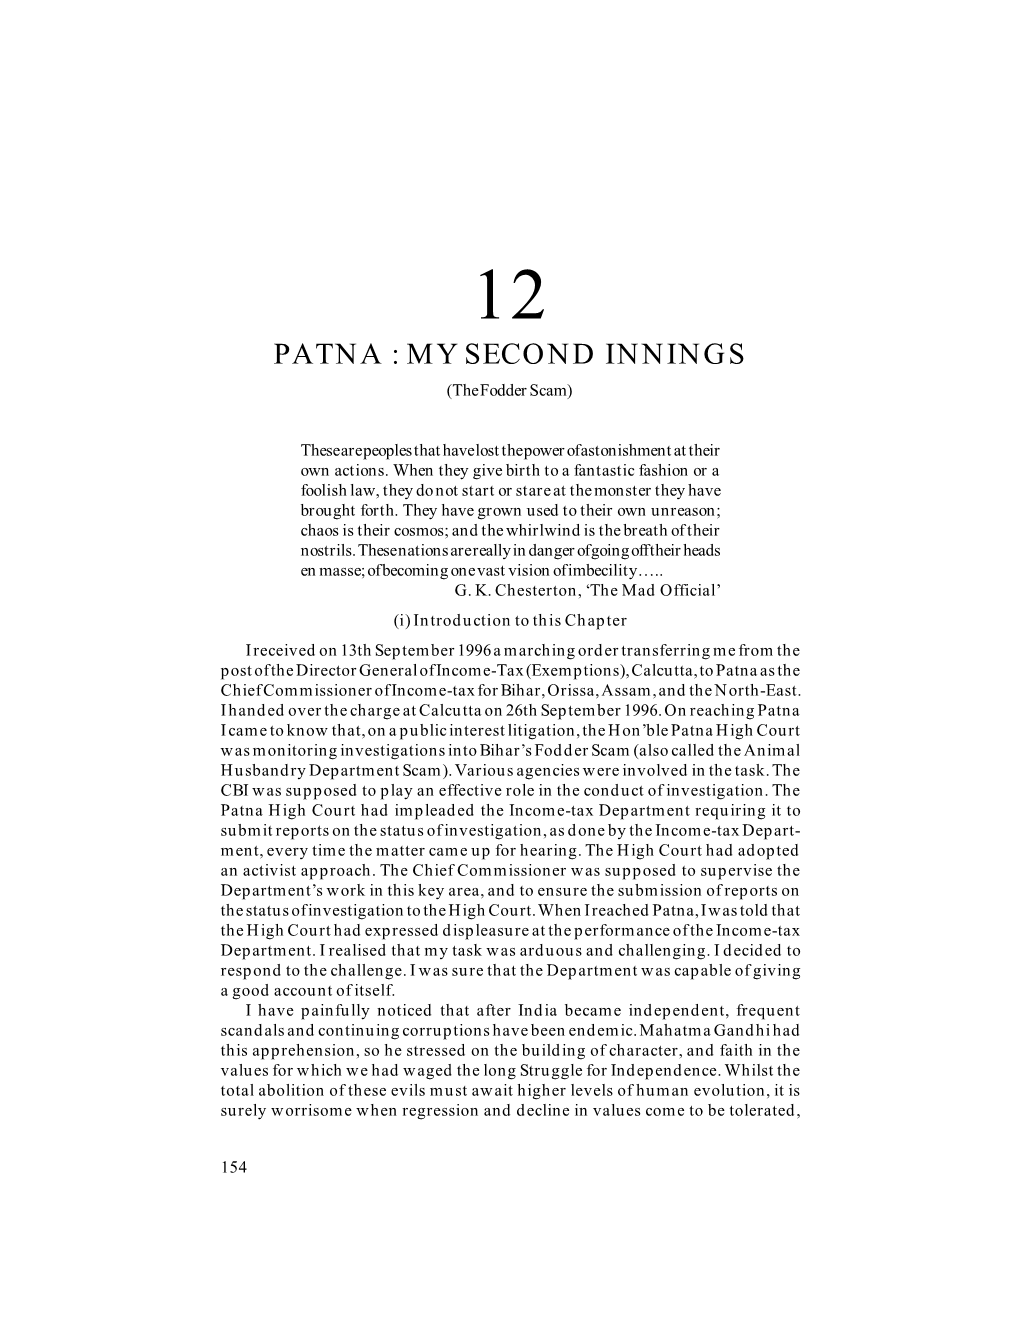 PATNA : MY SECOND INNINGS (The Fodder Scam)